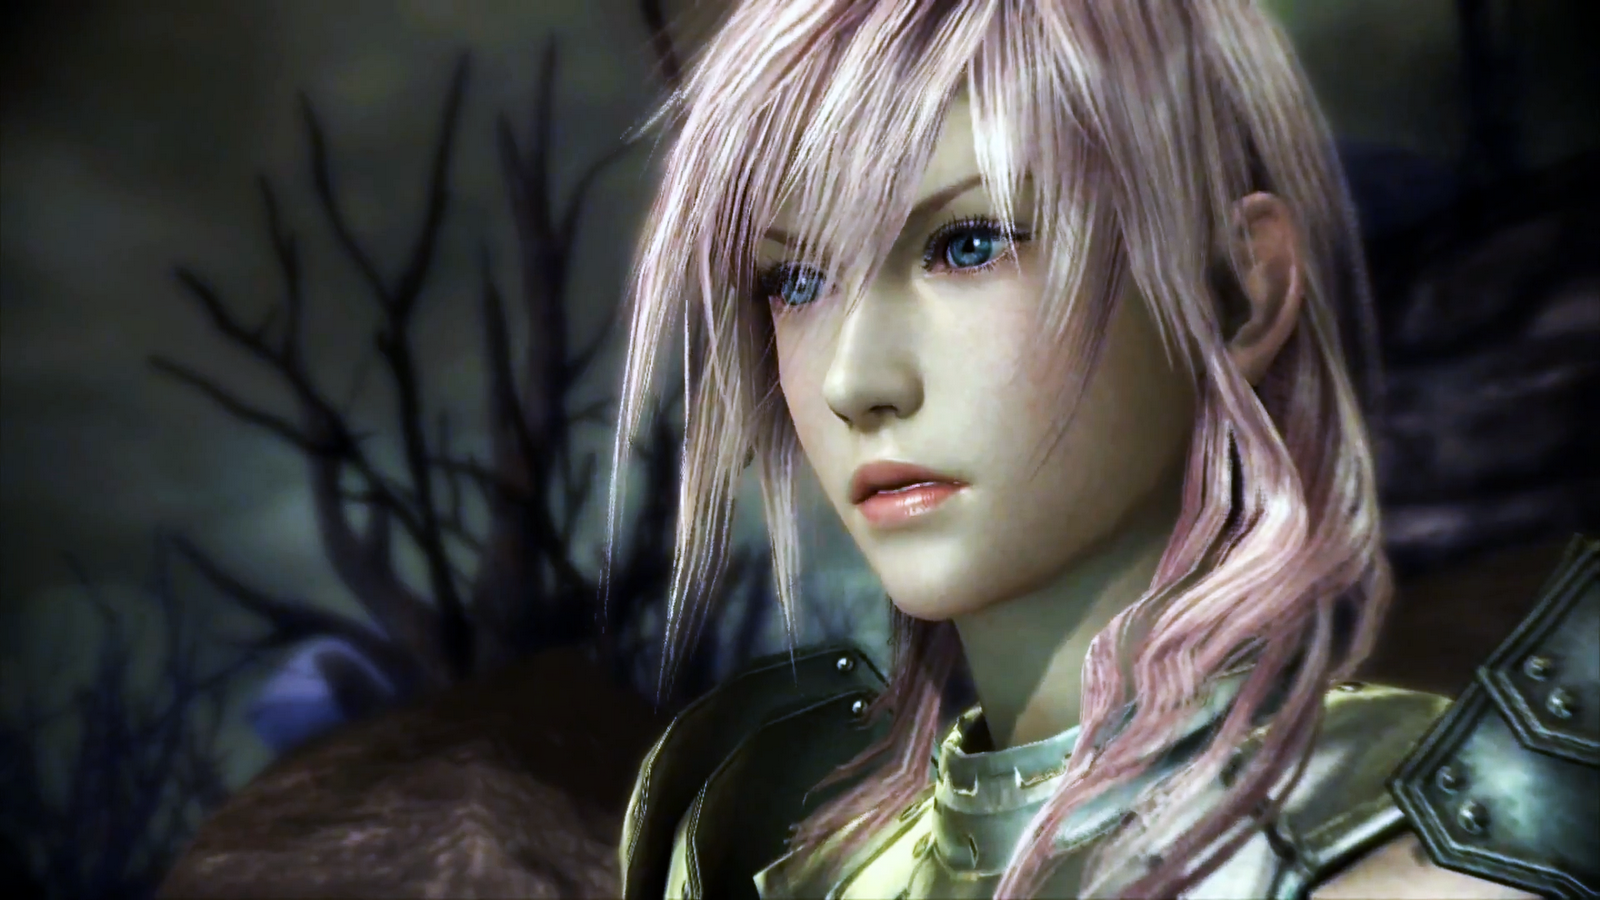 Final Fantasy XIII: How to Get Blue Hair for Lightning - wide 2